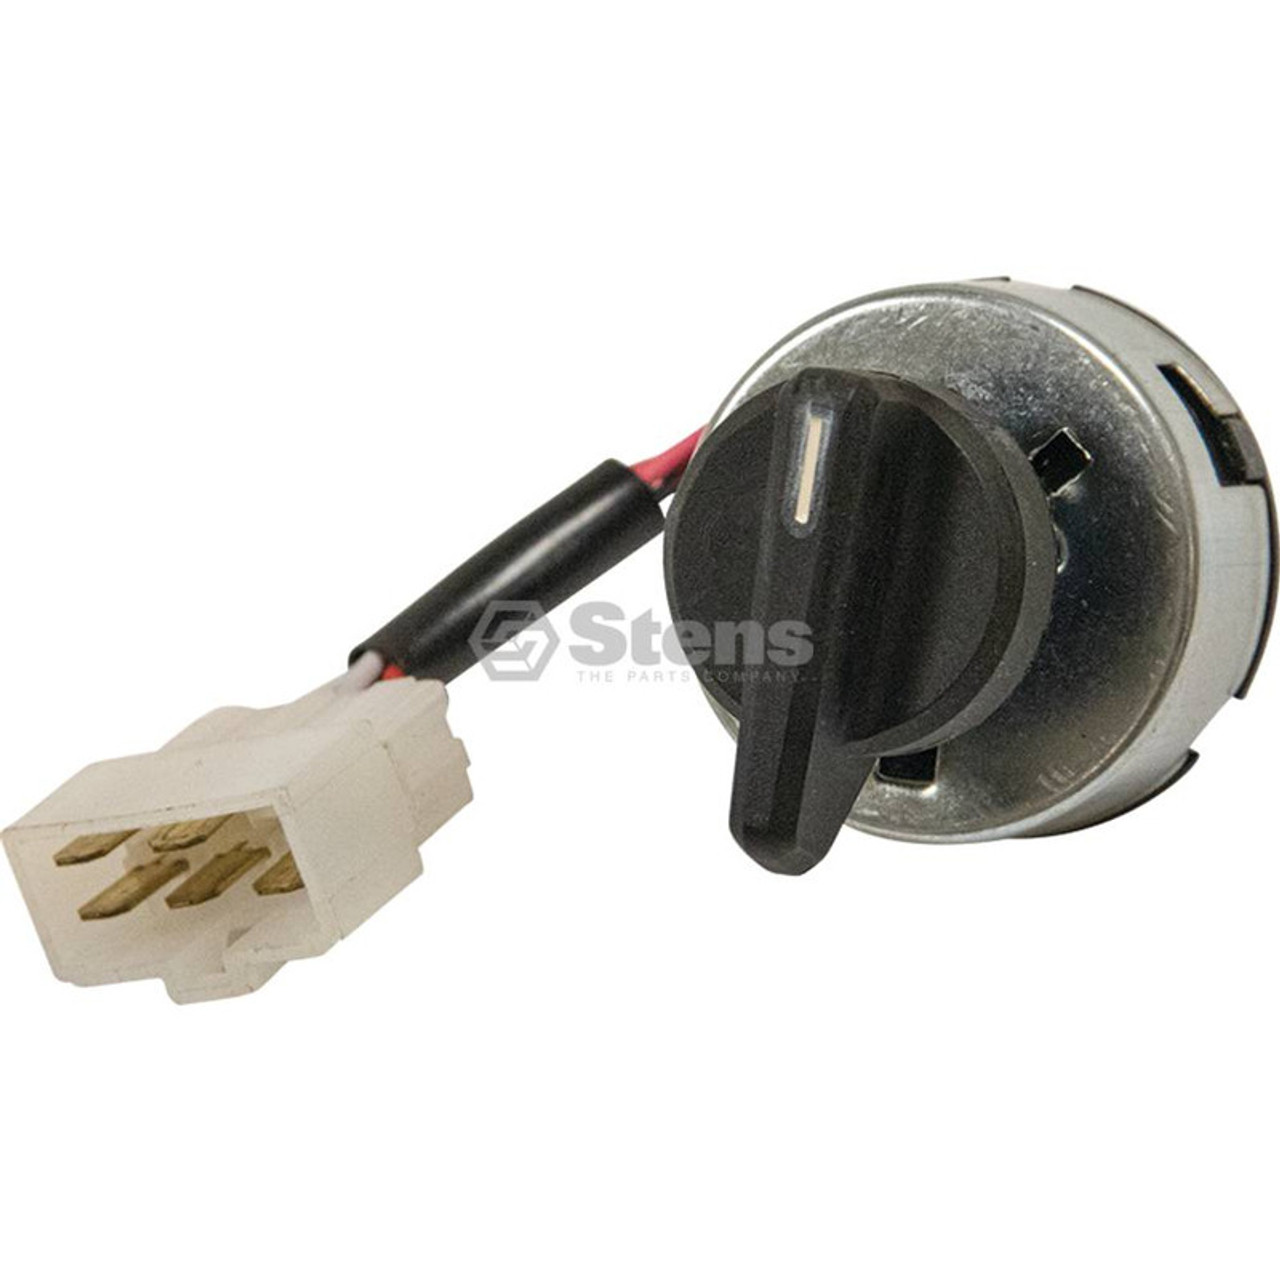 Light Switch for John Deere AM102356, AM876786, AR21823, 655, 755, 756, 855, 856, 670, 770, 790, 870, 955, 970, 990, 1070 Compact Utility Tractors